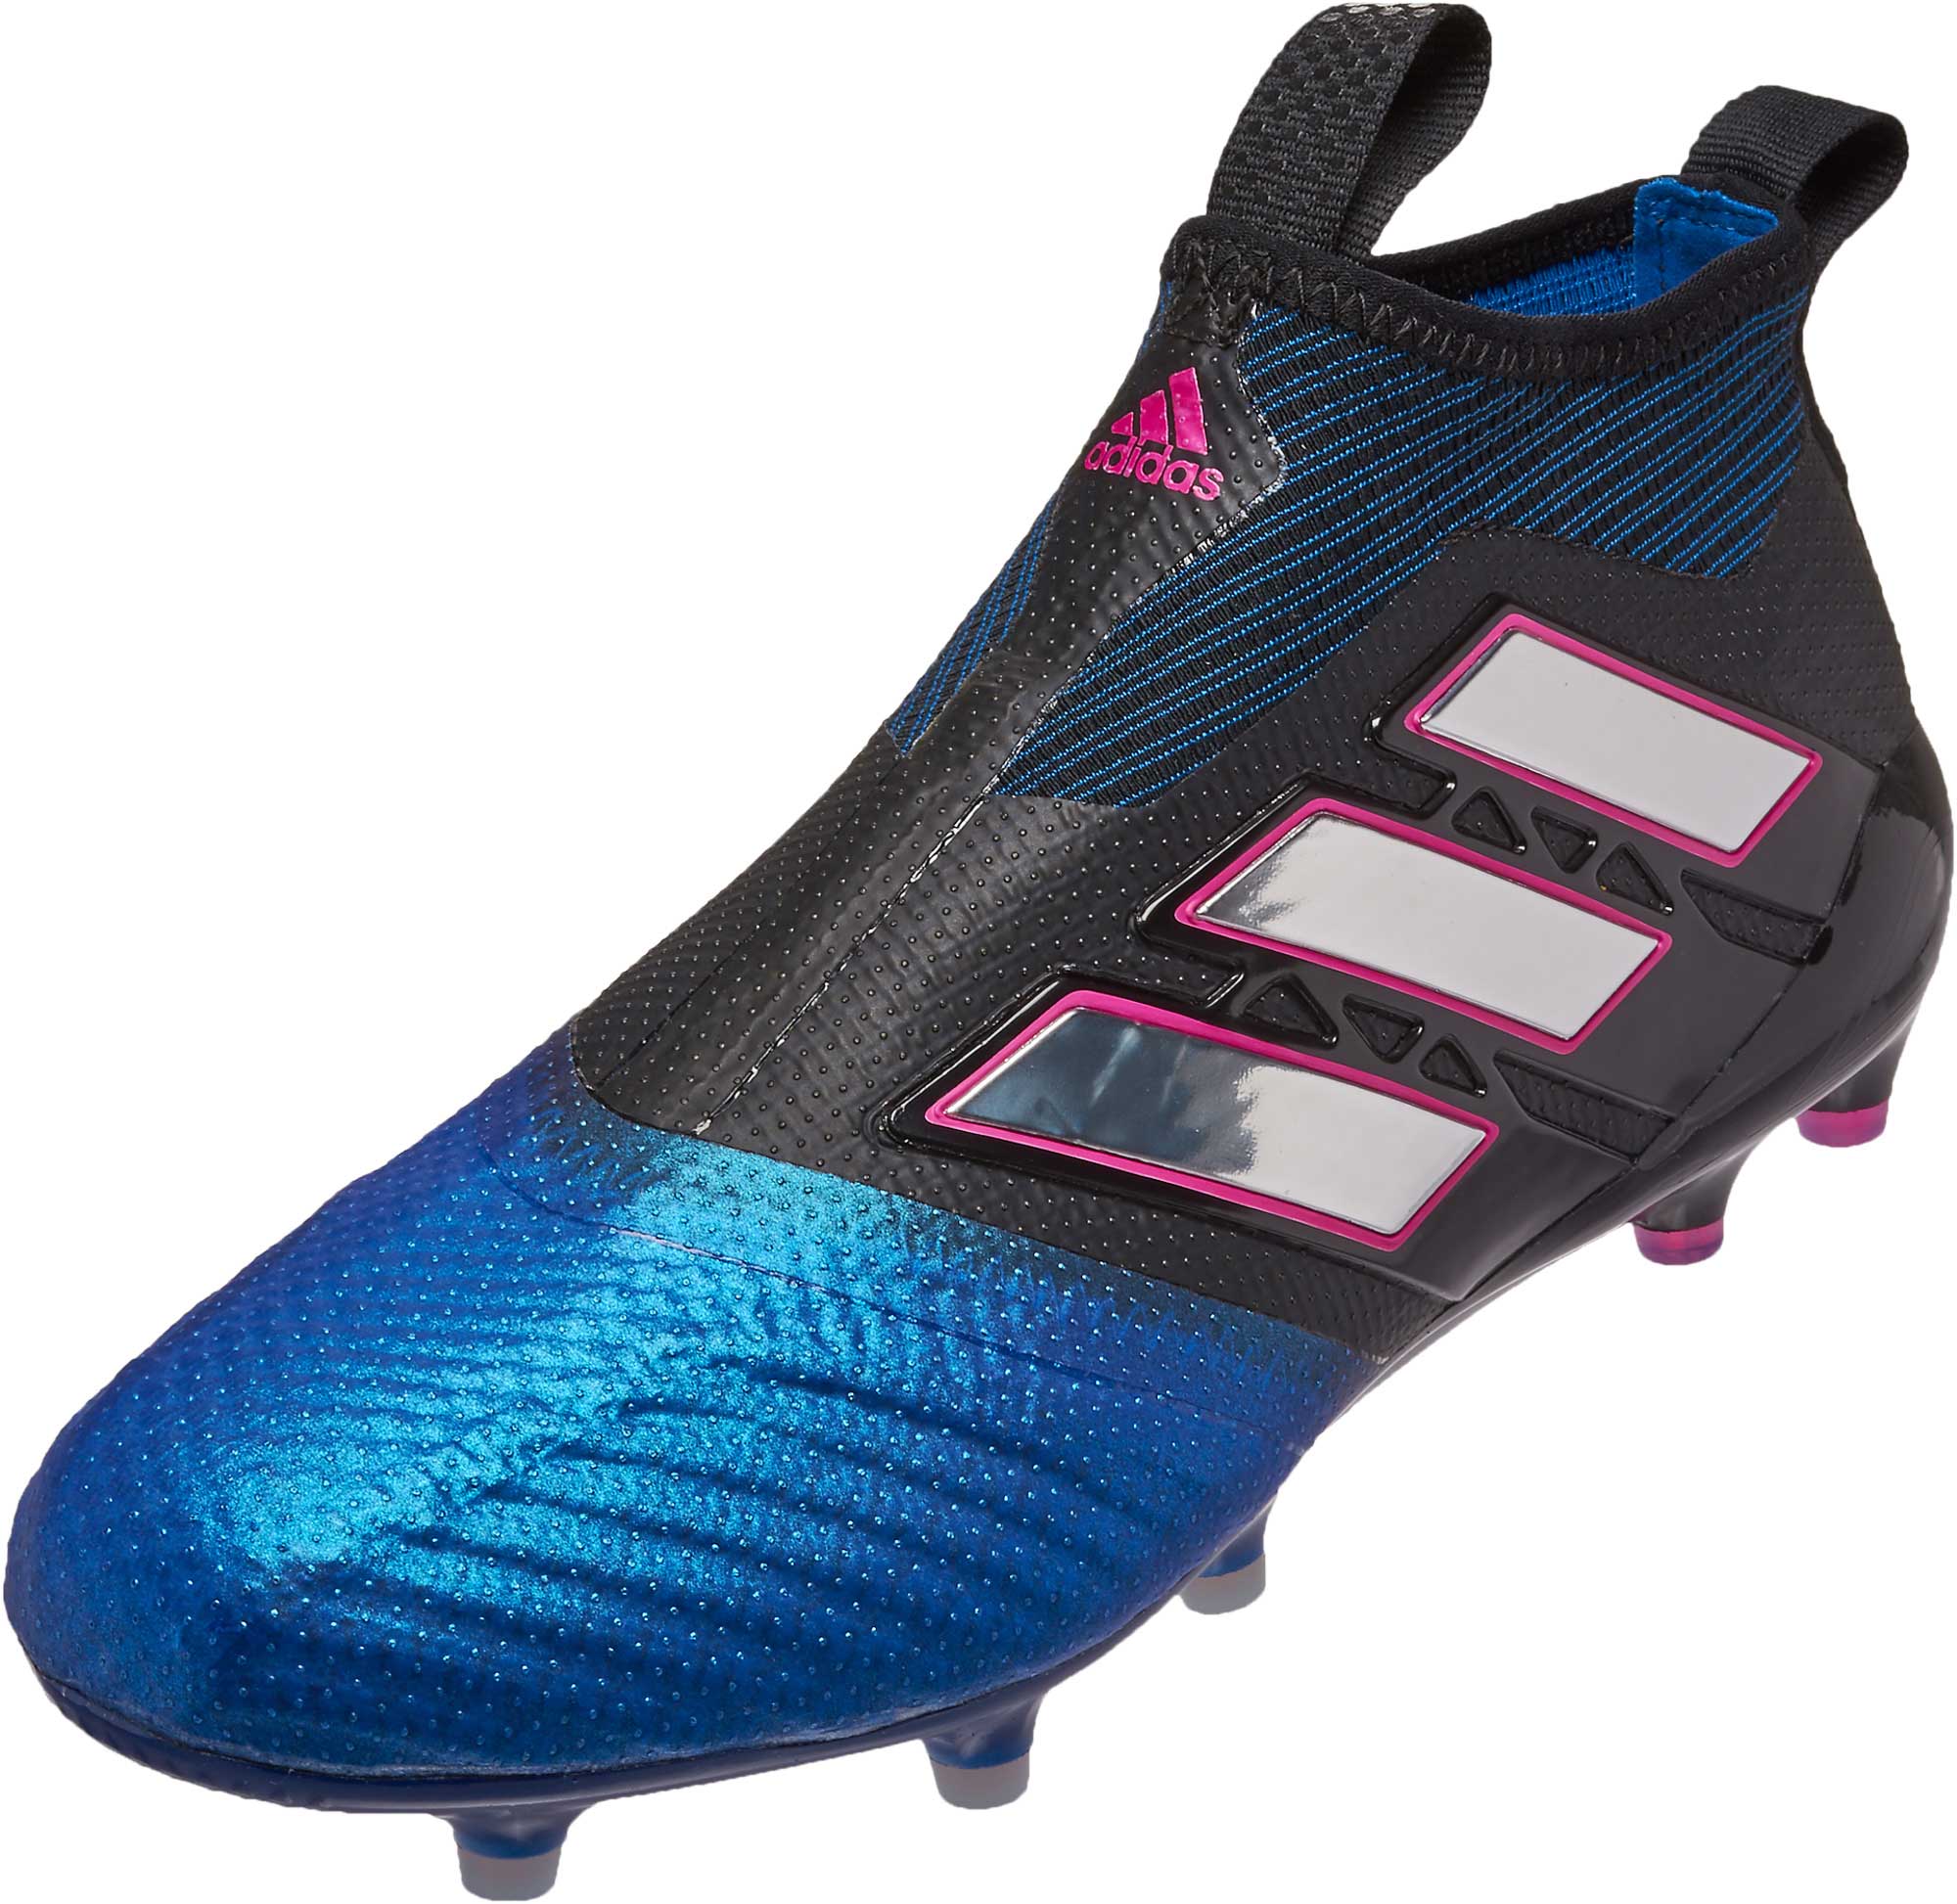 ACE 17 Purecontrol FG adidas ACE Soccer Cleats